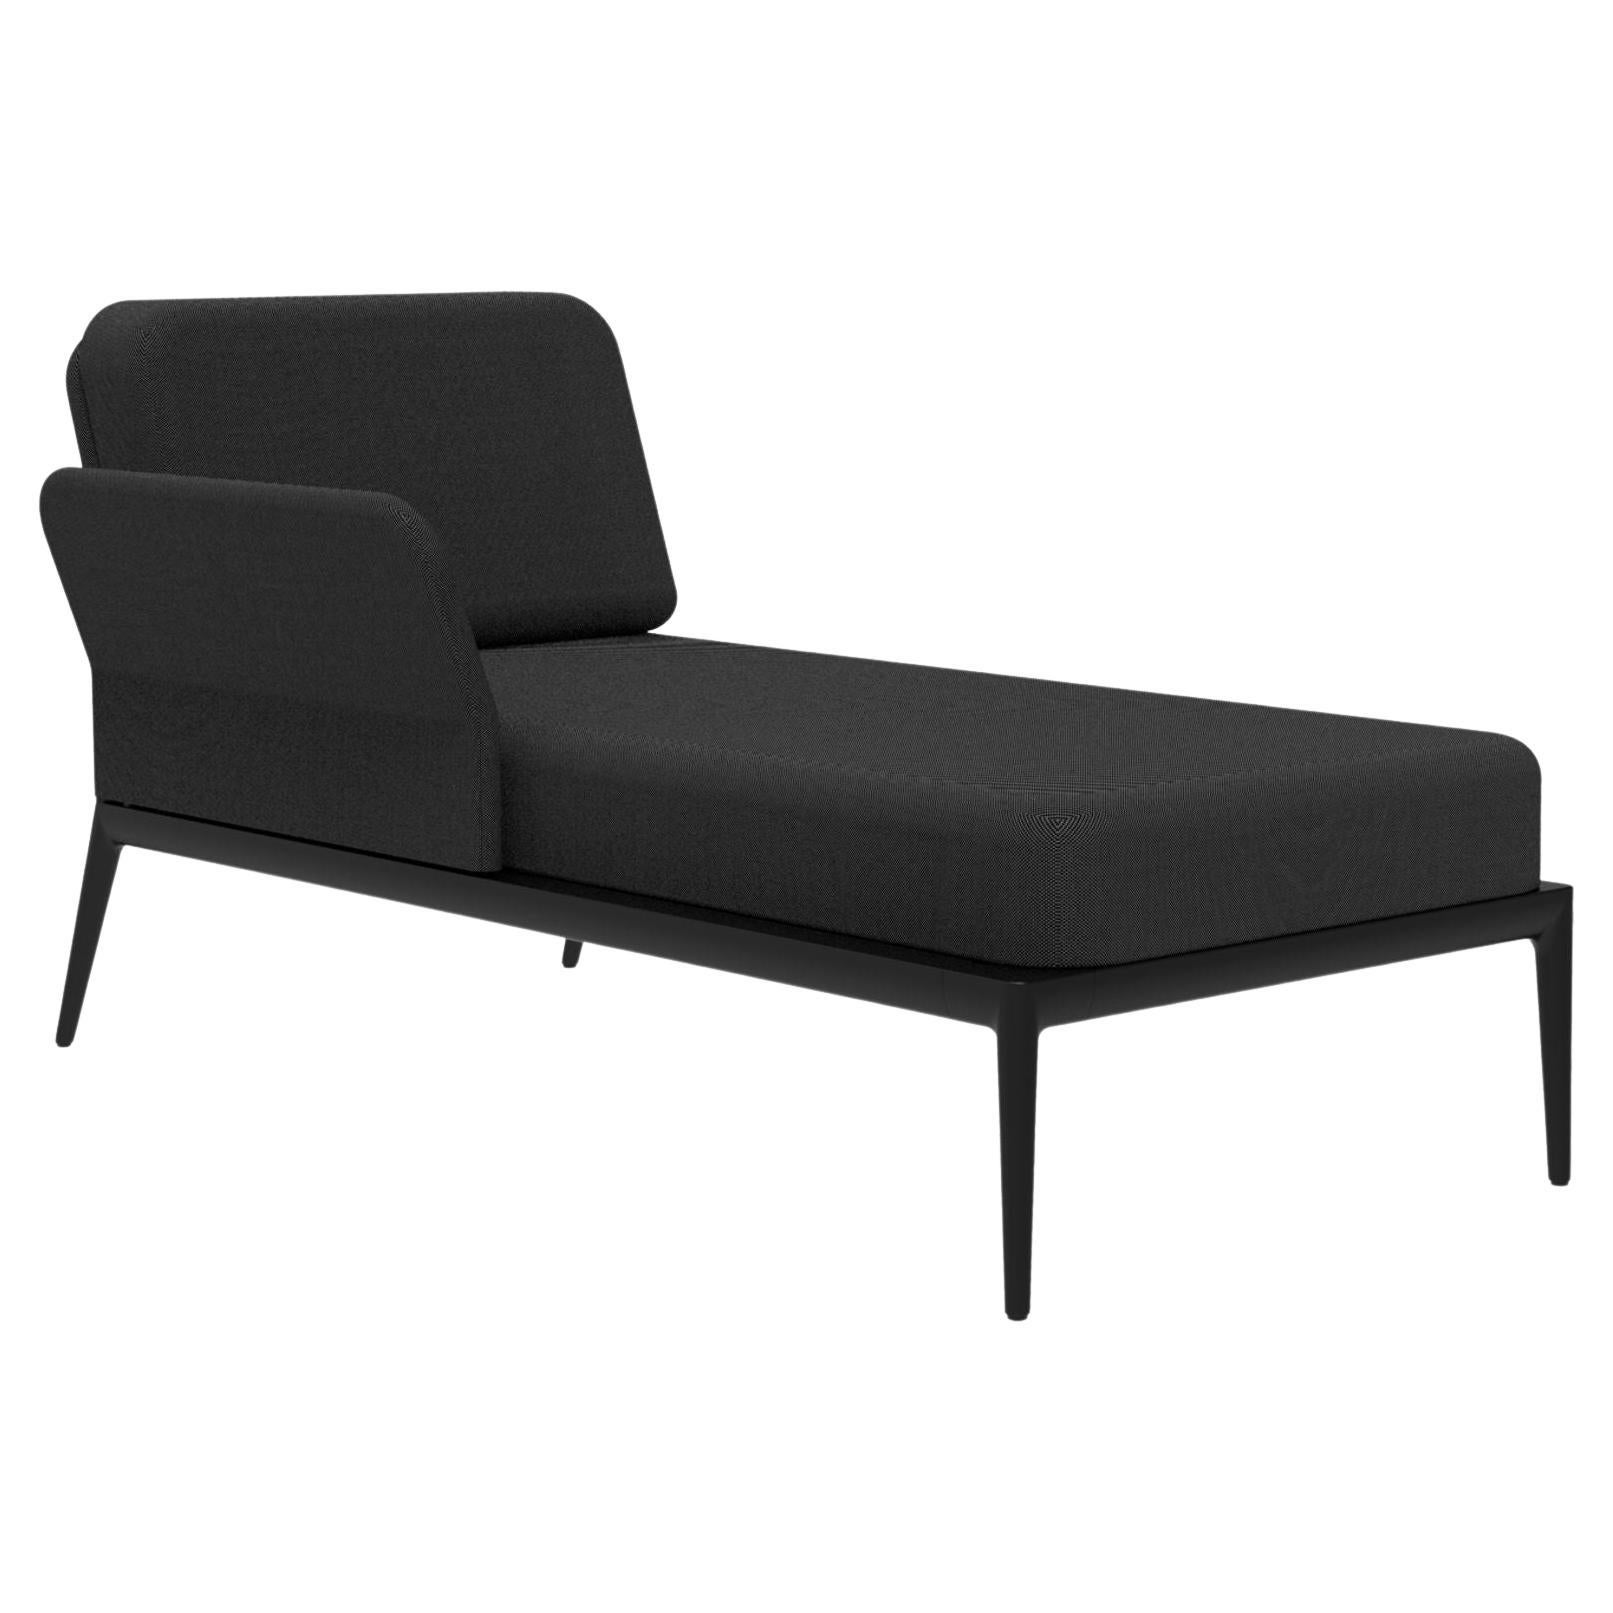 Cover Black Right Chaise Longue by MOWEE